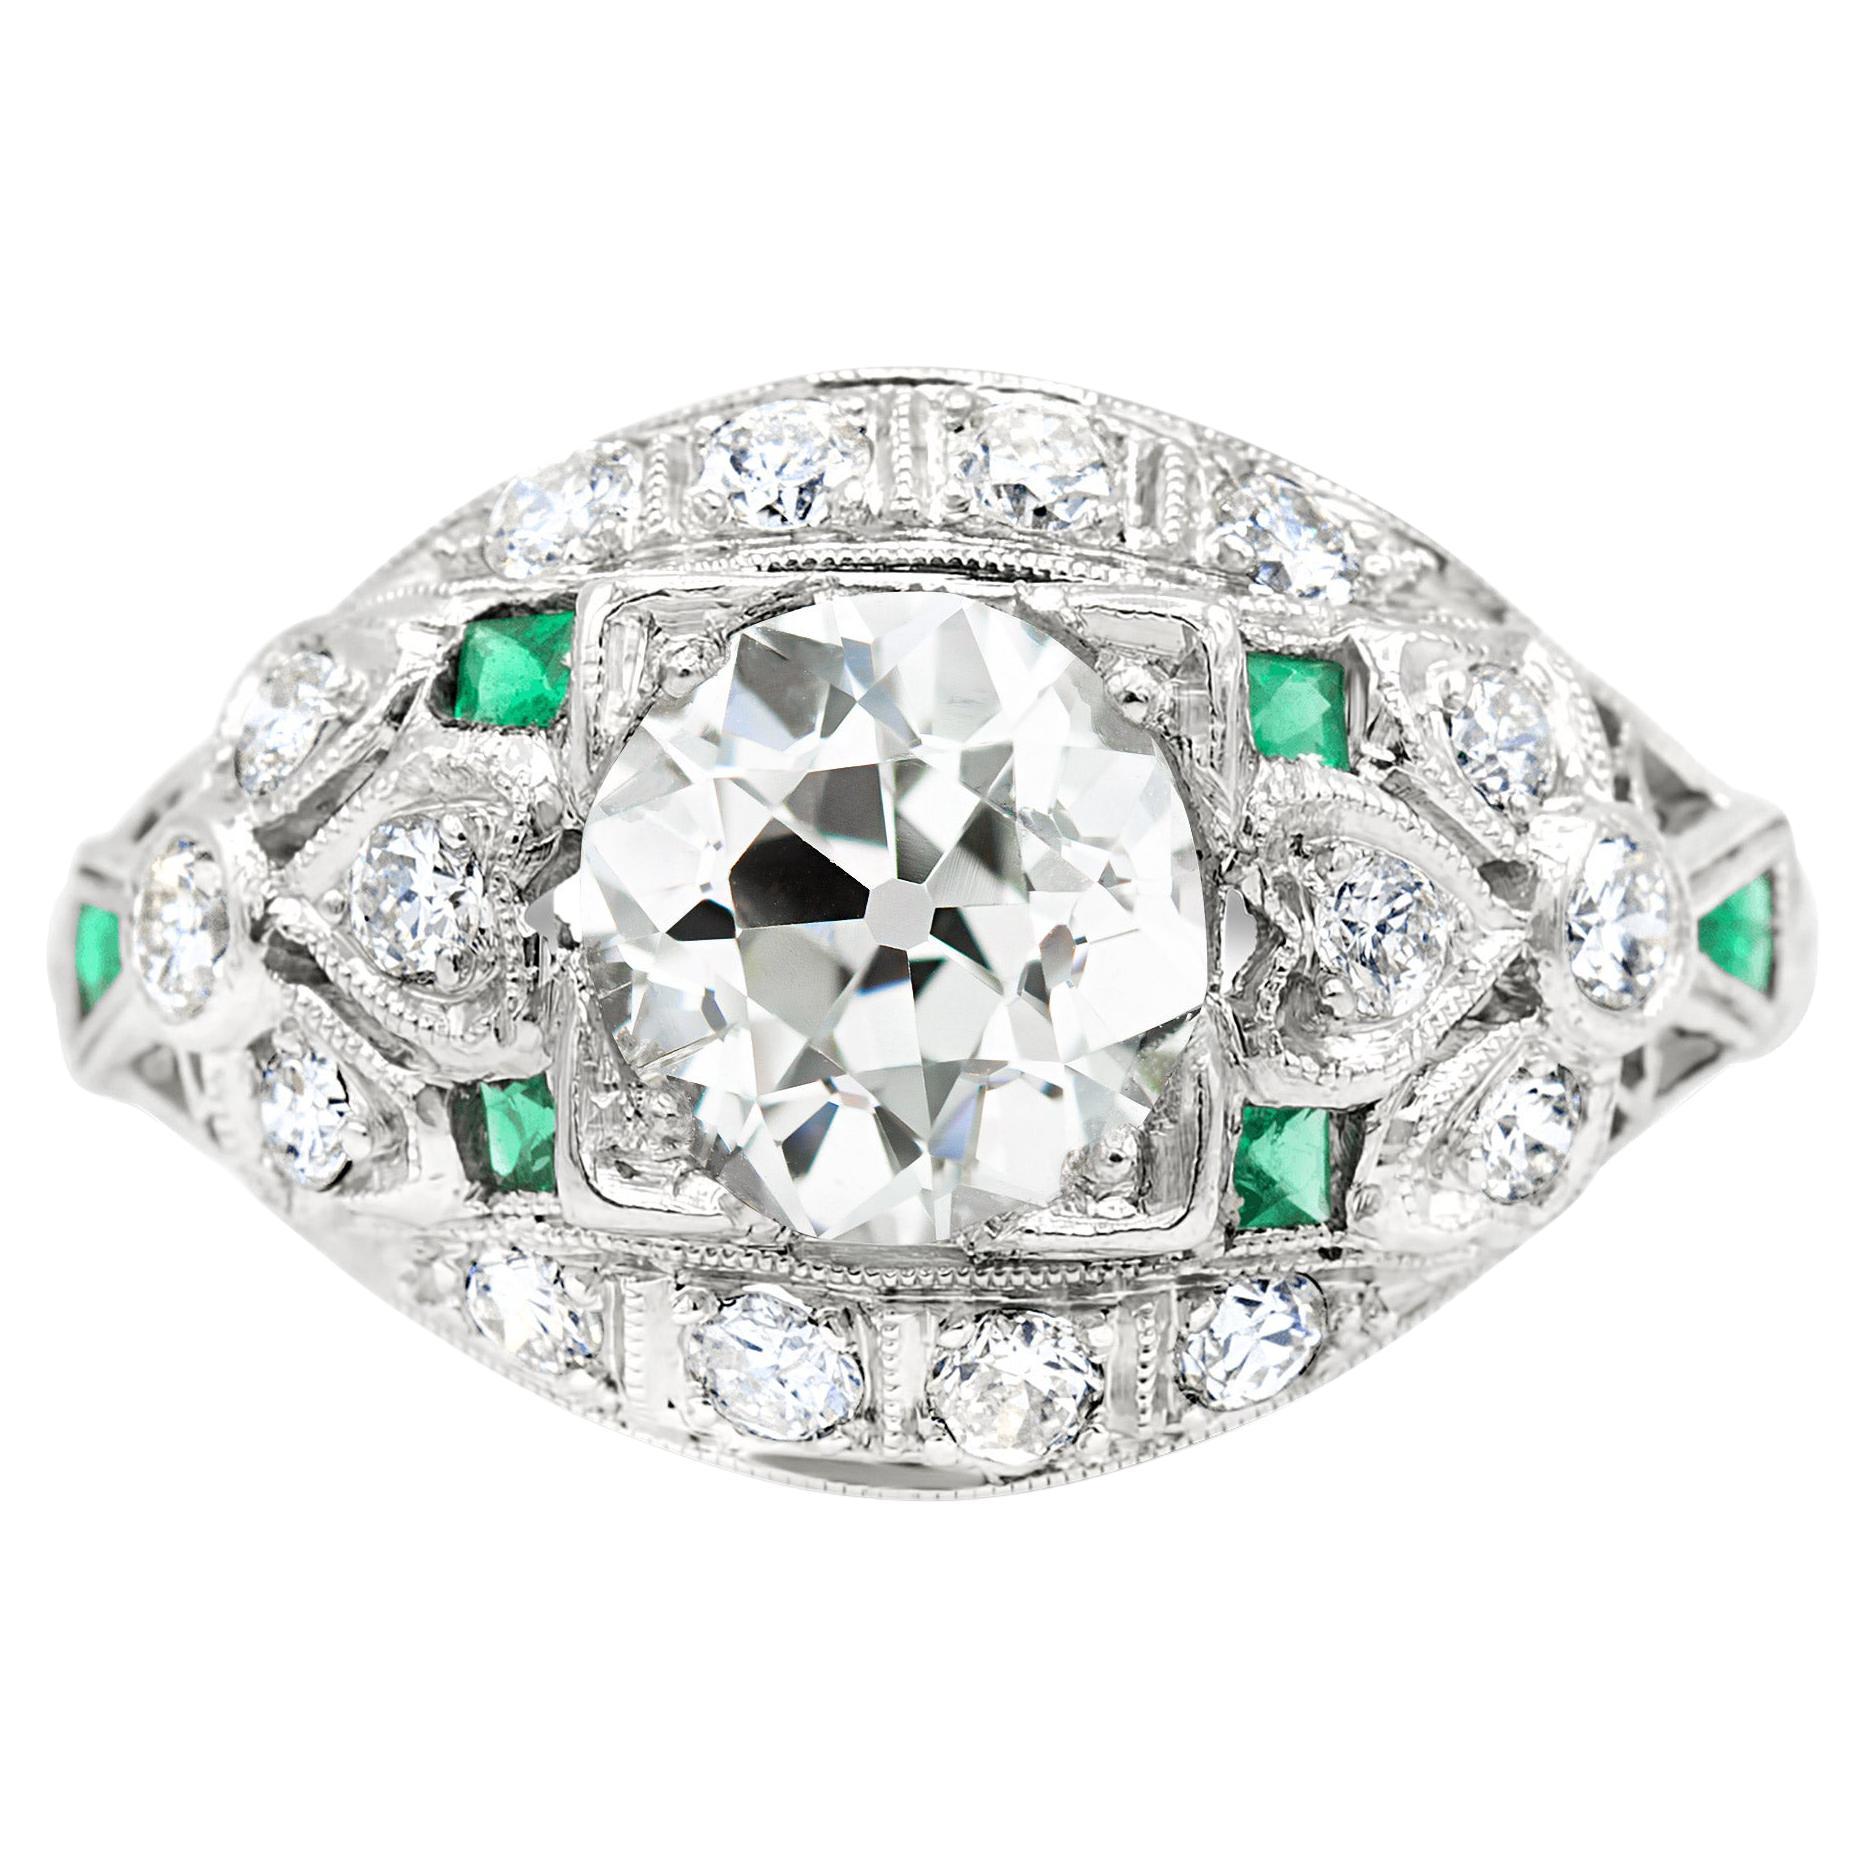 Art Deco 1.49 Ct. Diamond and Emerald Engagement Ring GIA J SI2, Platinum For Sale